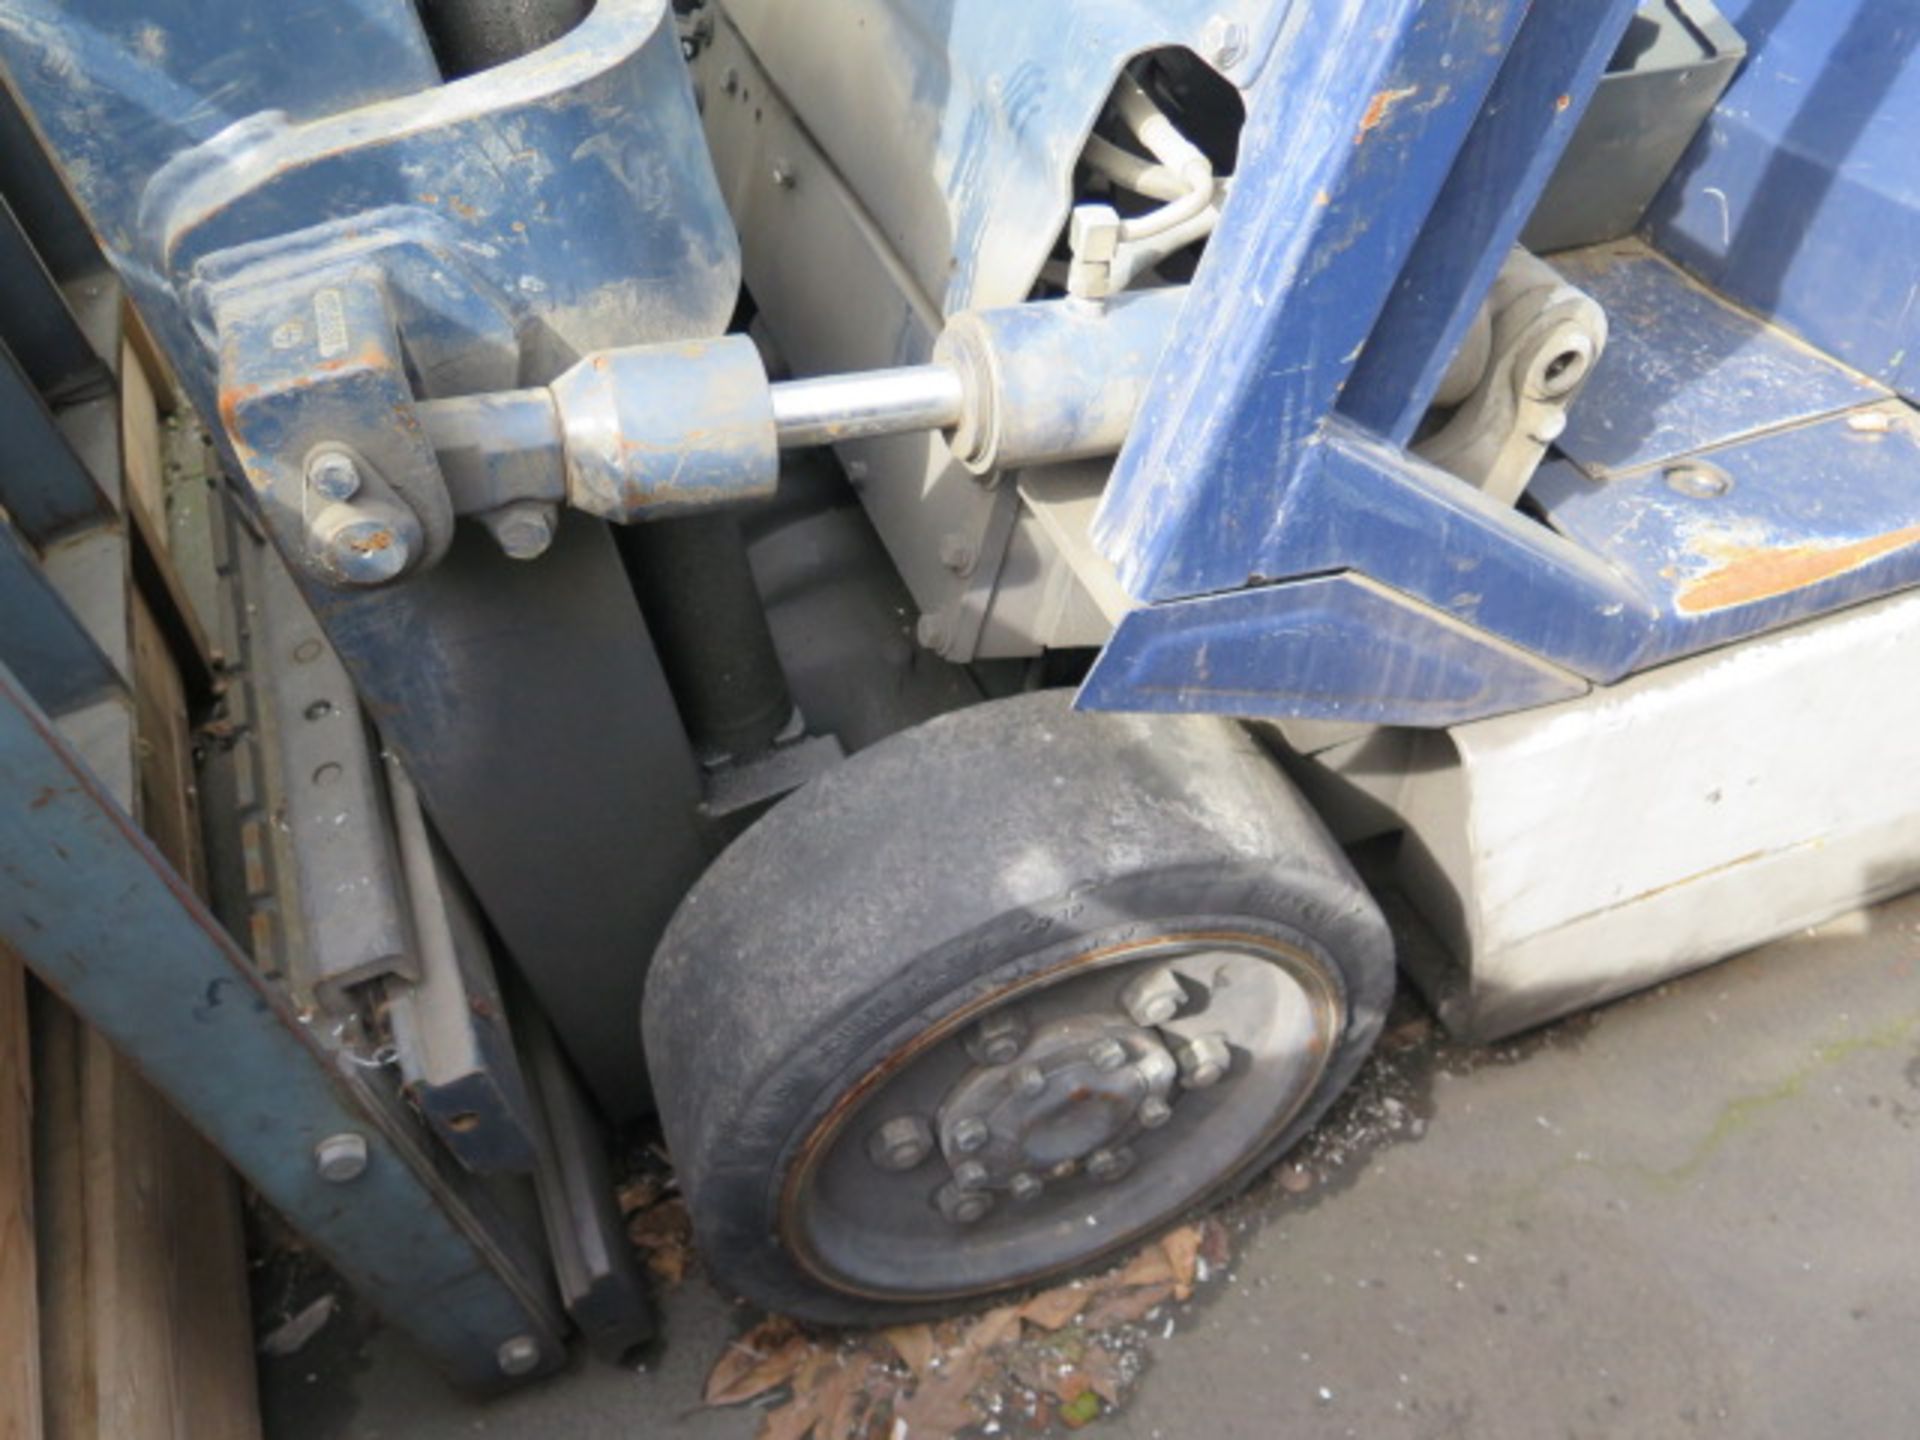 Komatsu 5000 Lb Cap LPG Forklift w/ 3-Stage Mast, Side Shift, 4th Actuator Lever, SOLD AS IS - Image 18 of 21